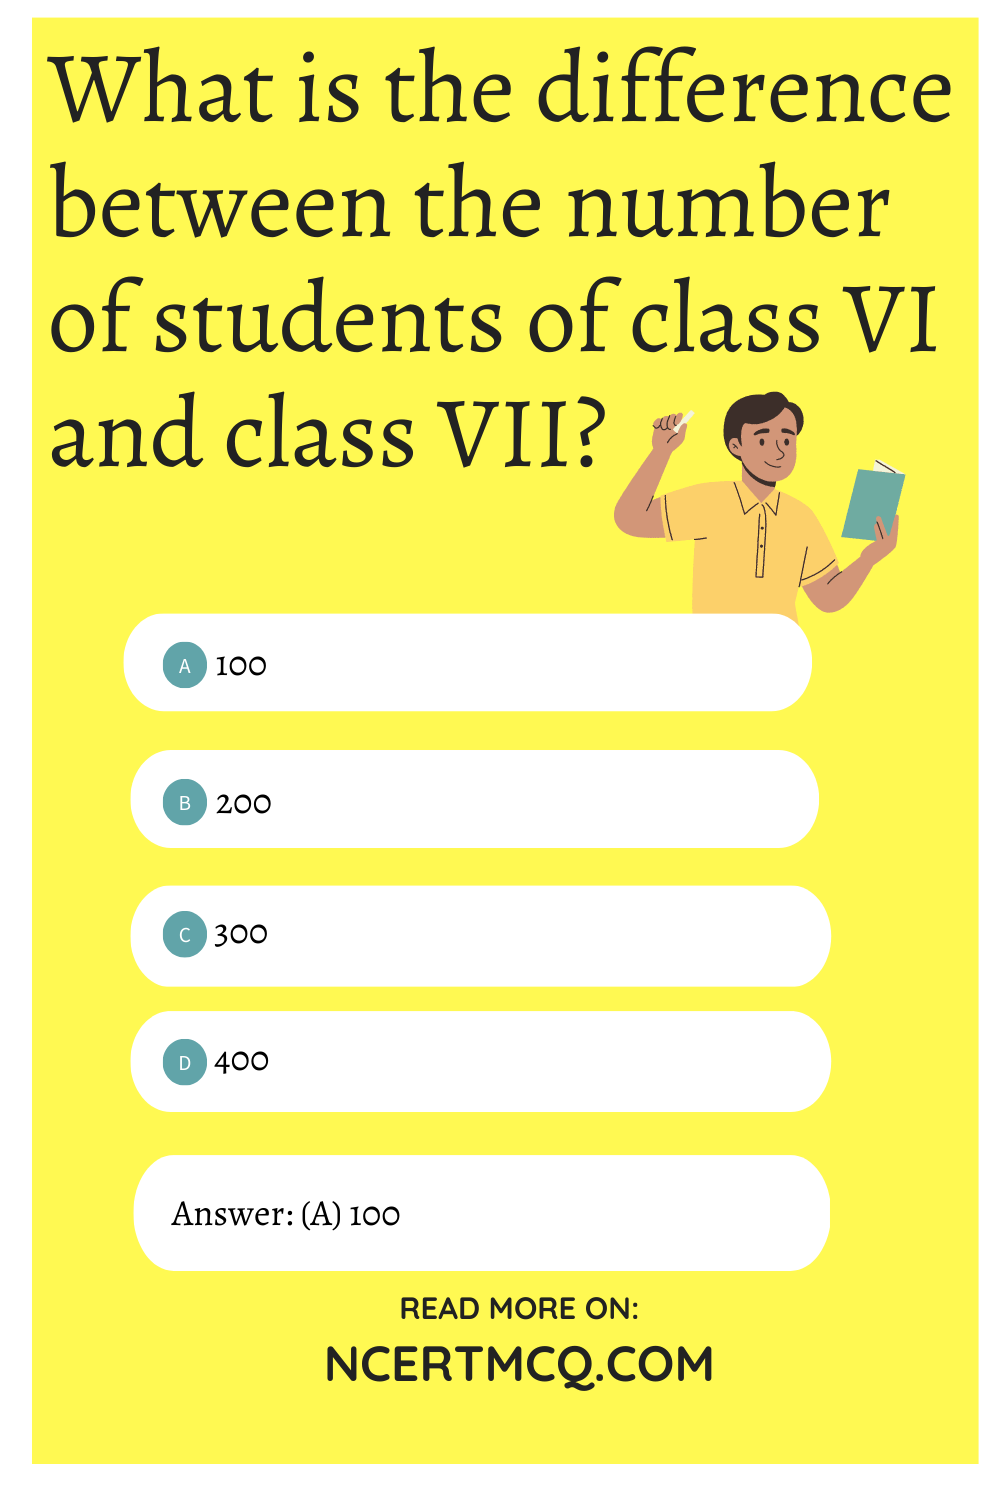 What is the difference between the number of students of class VI and class VII?